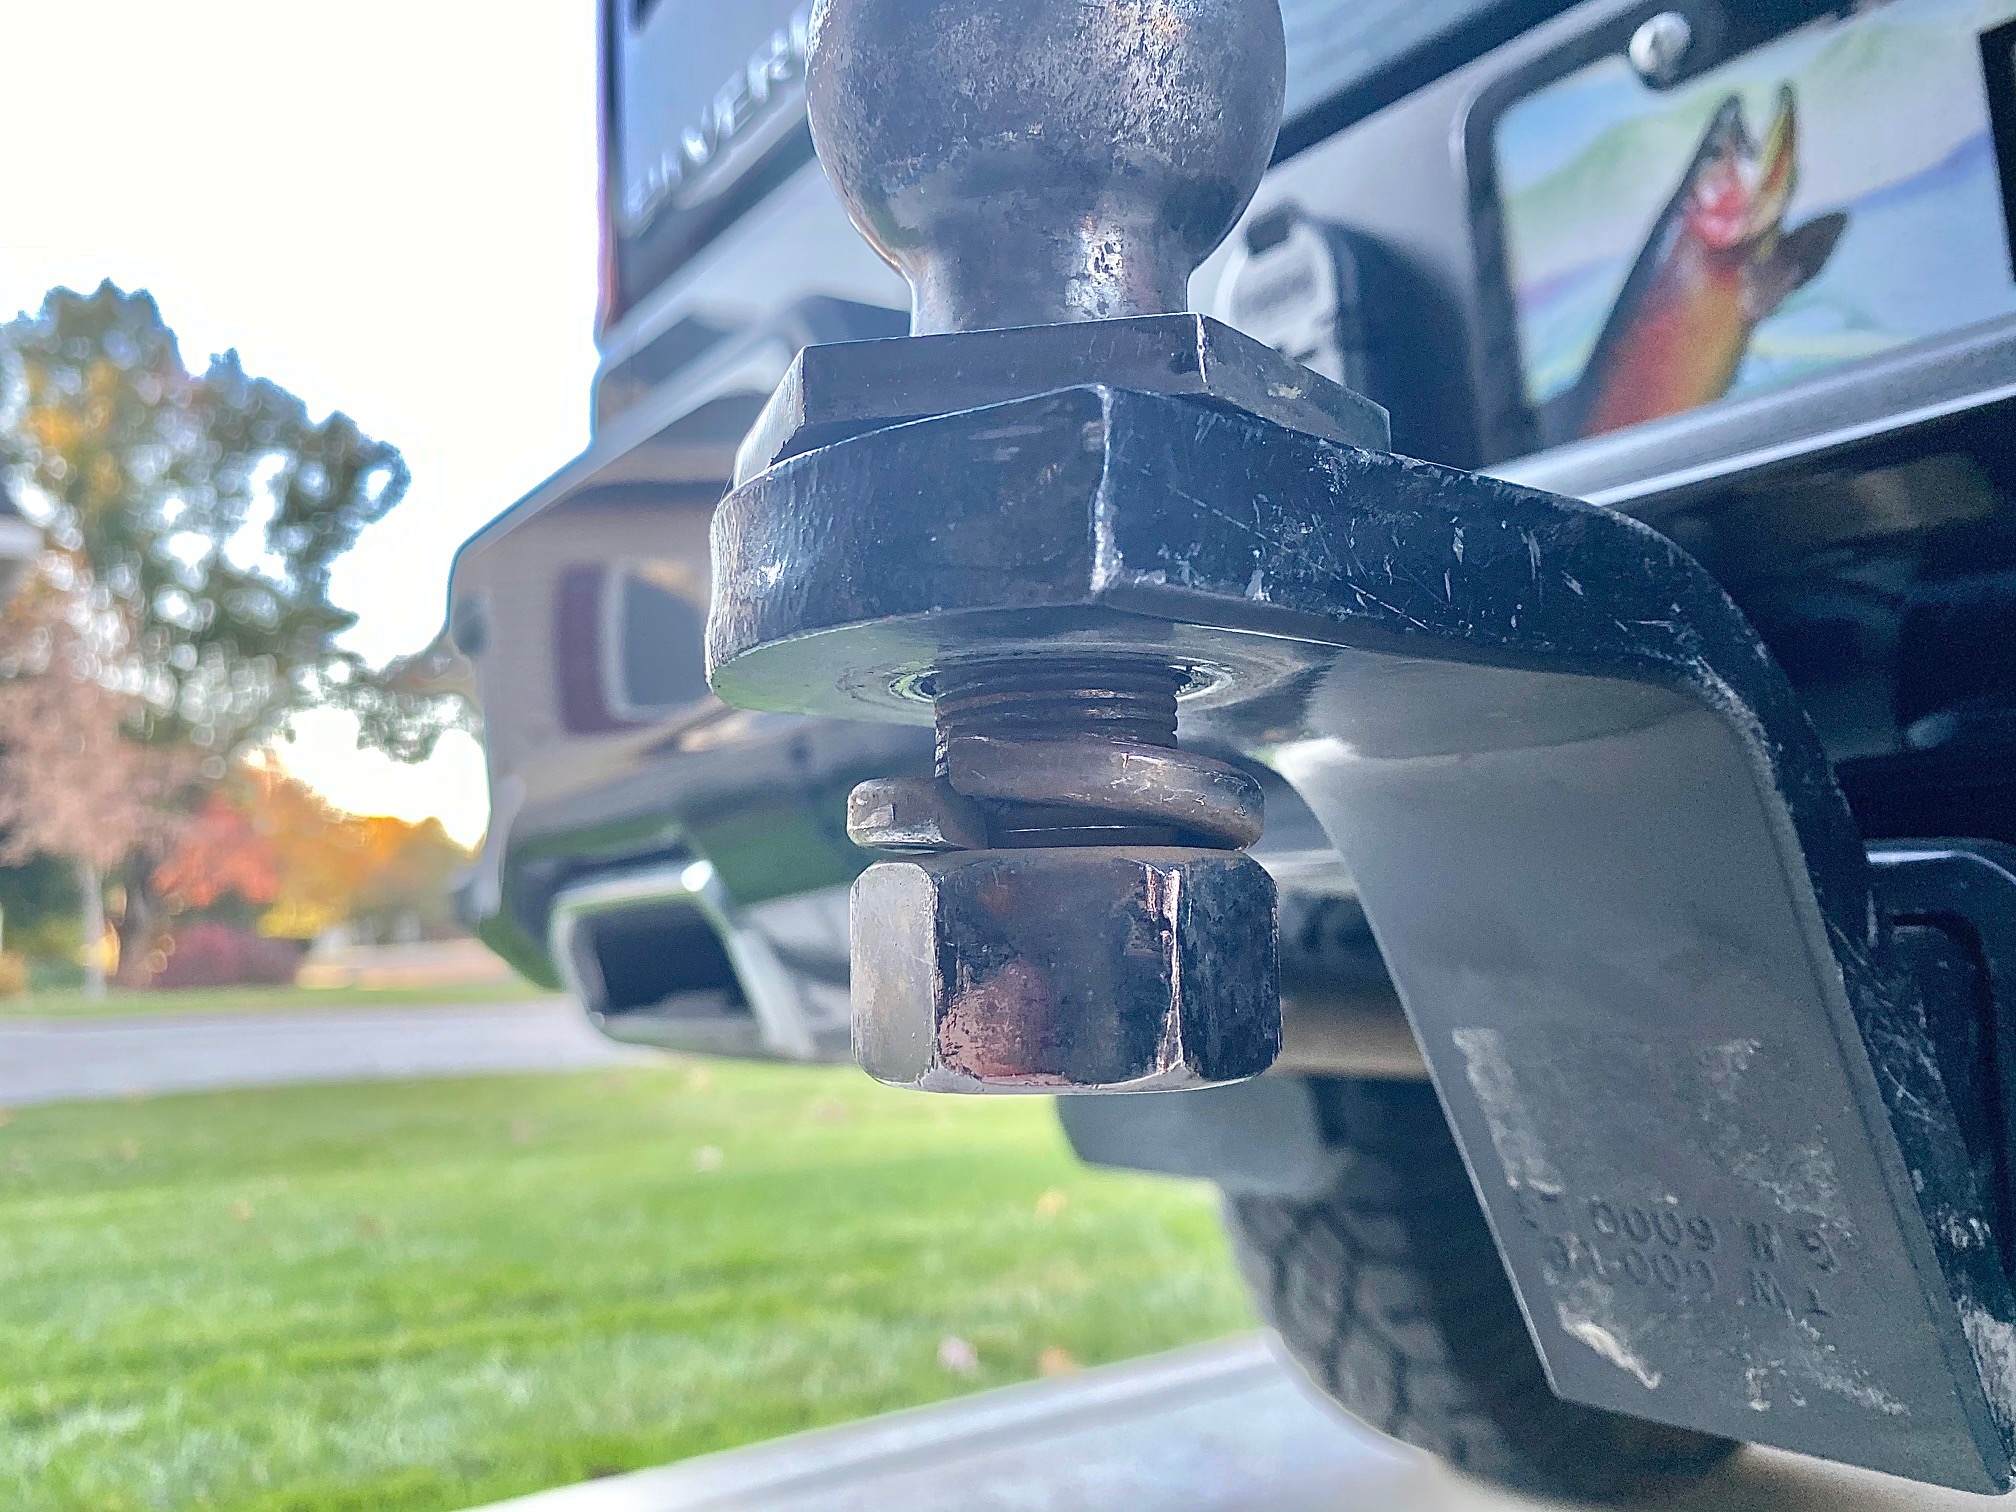 Trailer hitch with ball almost coming off due to a lose nut and bolt.  Trailer Safety suggestions by the Miller Insurance Agency - Everett Washington